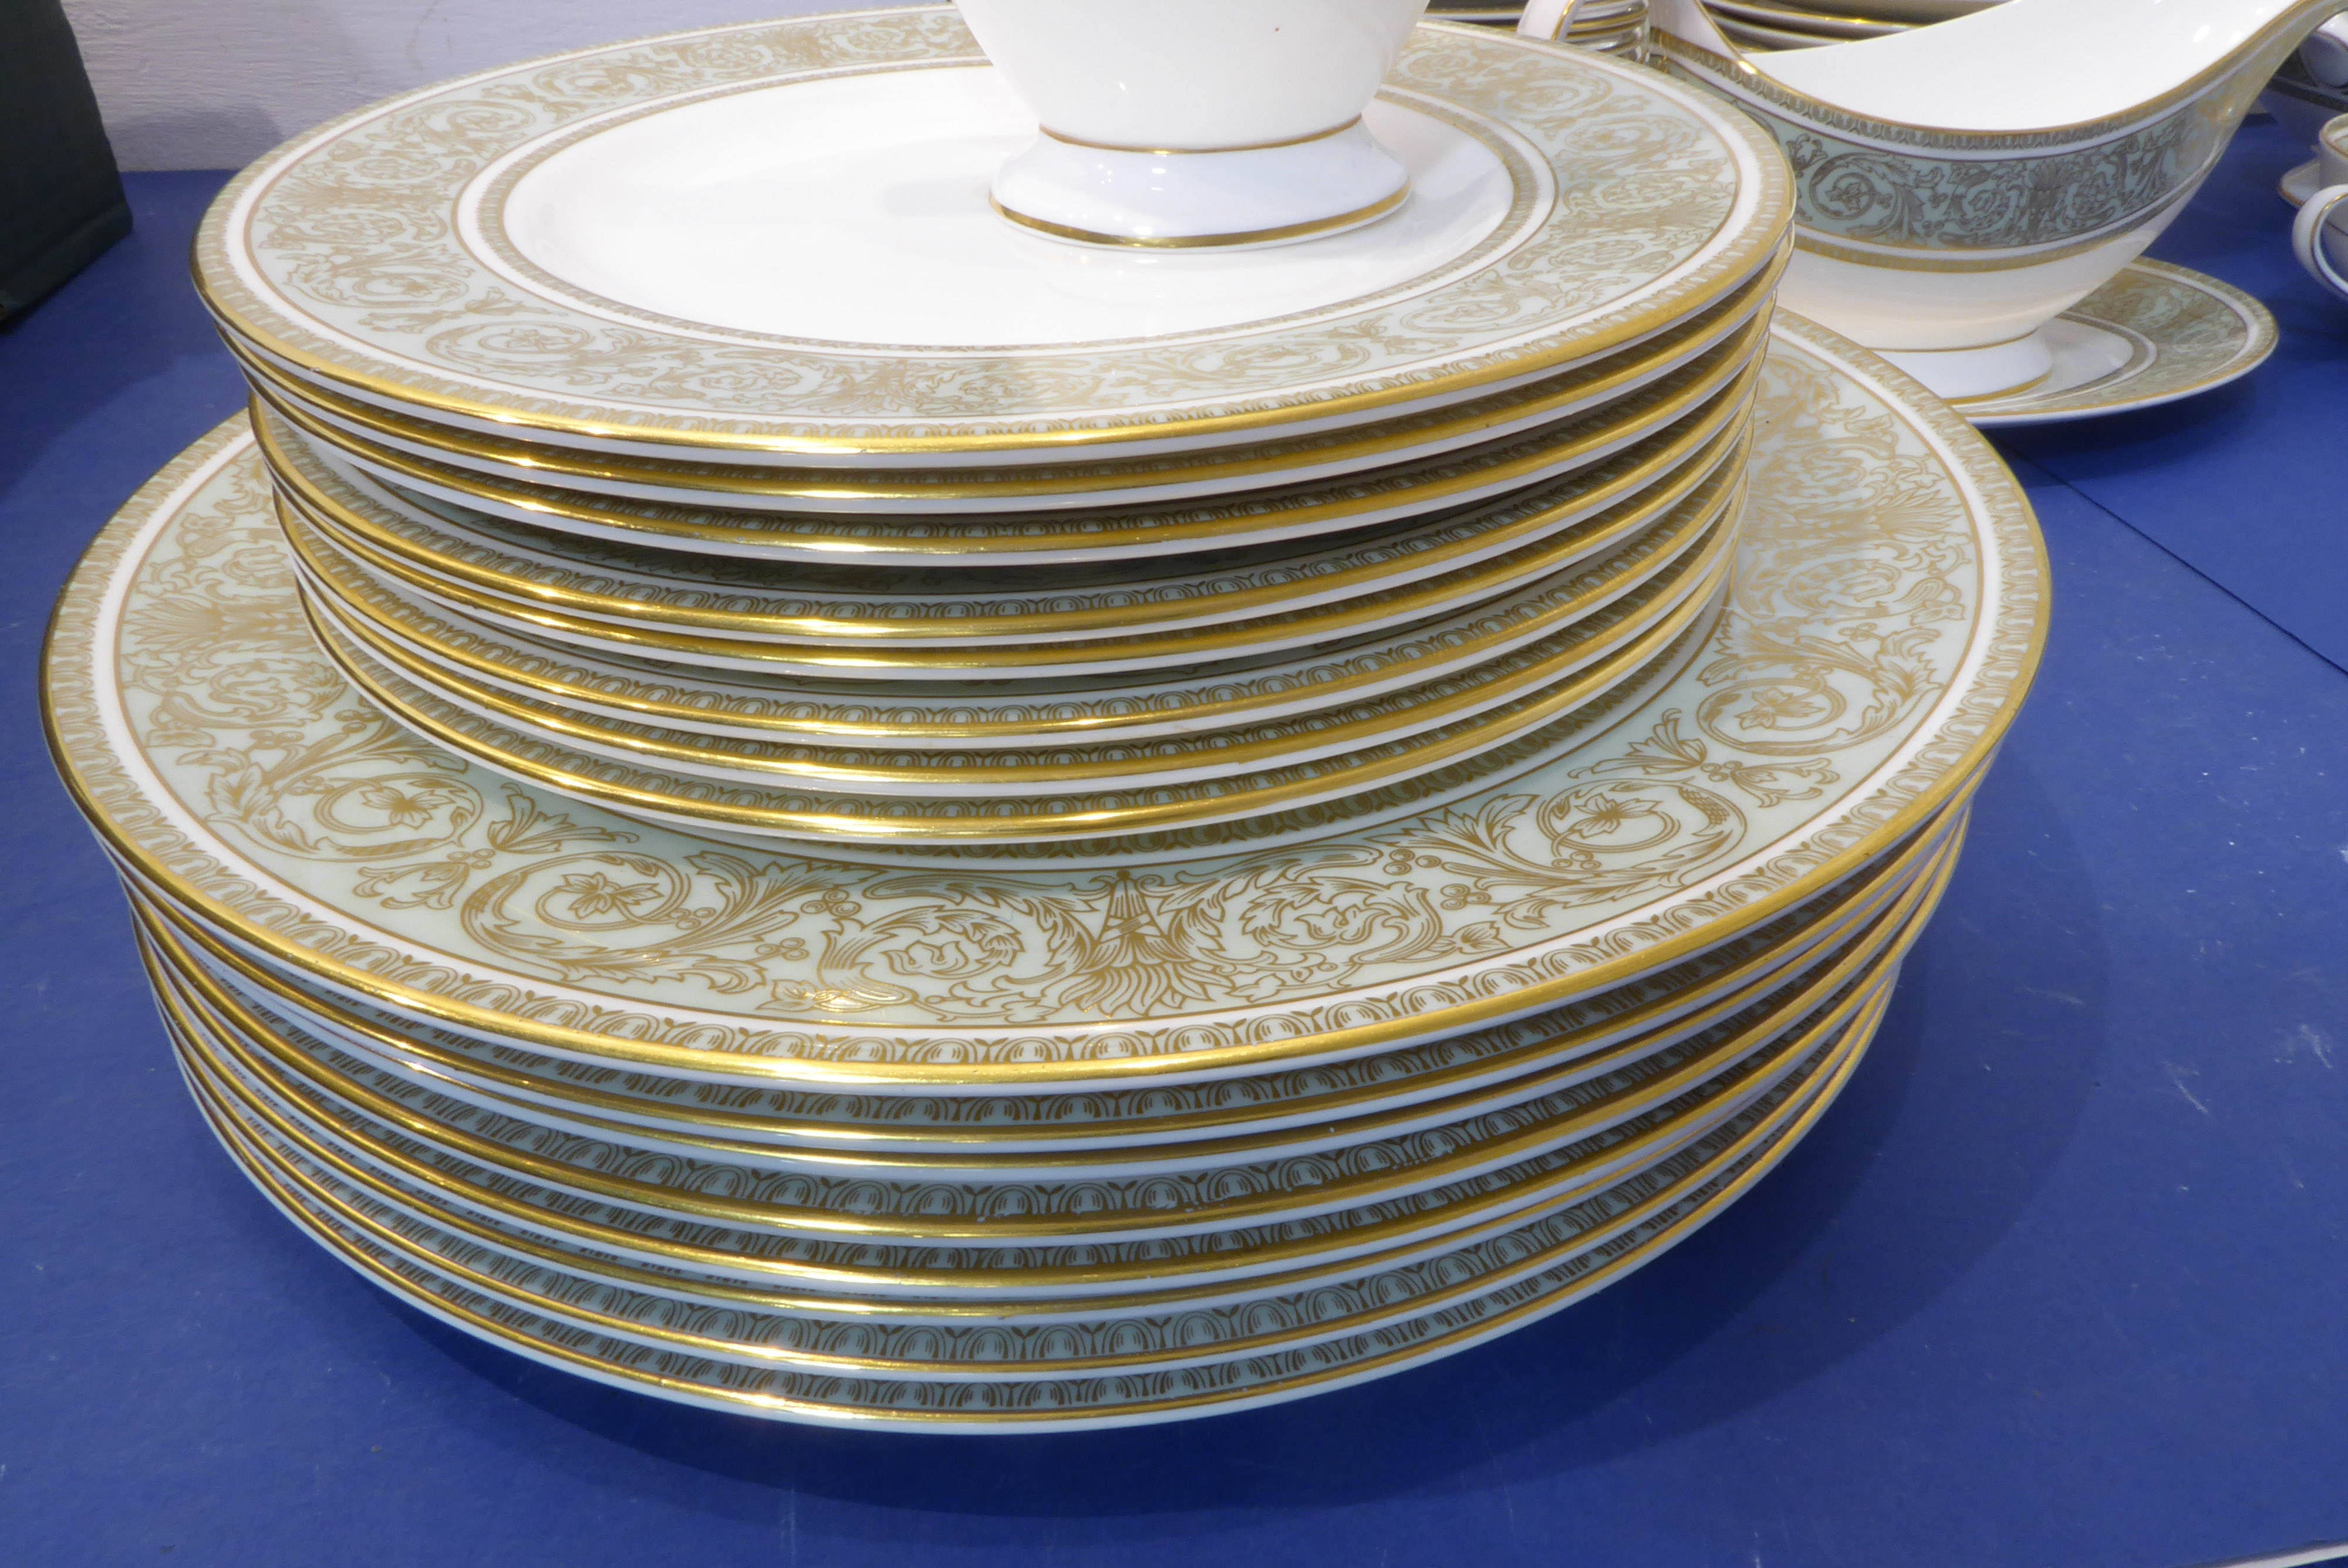 A Royal Doulton dinner / tea service in the English Renaissance pattern: 8 x 27cm and 20cm plates, - Image 4 of 8